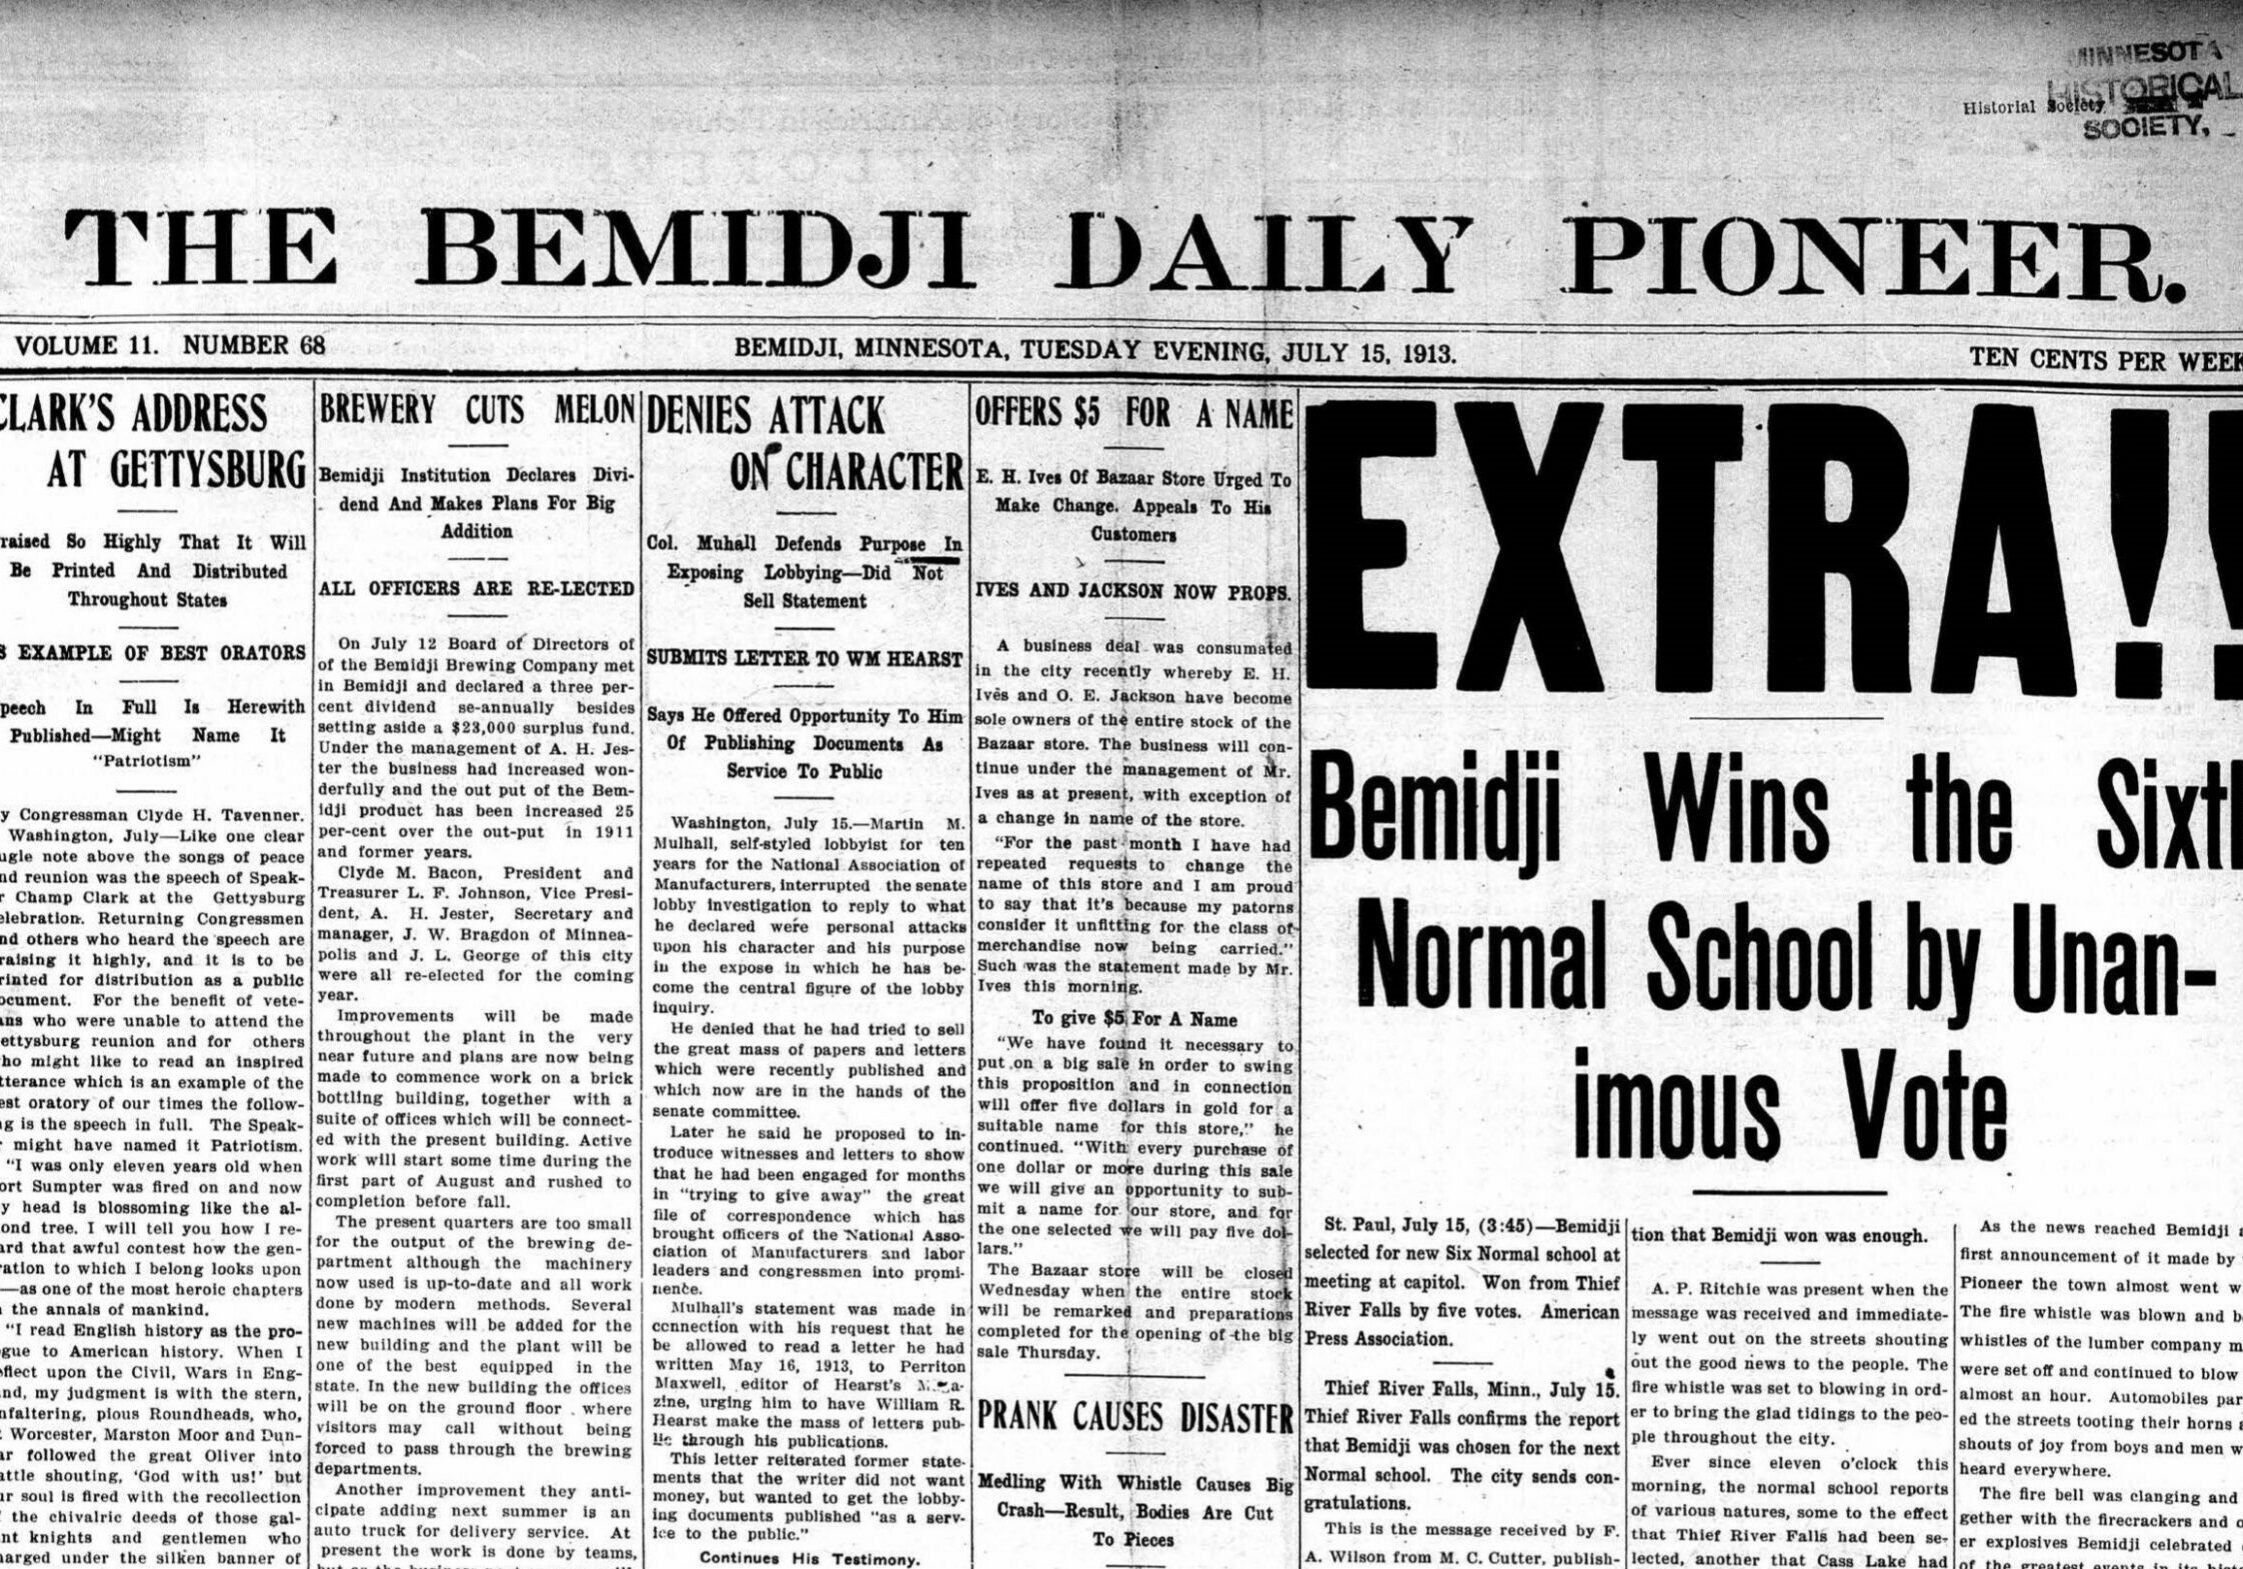 The July 15, 1913, edition of the Bemidji Daily Pioneer proclaimed that Bemidji had been selected as the winner of Minnesota's newest normal school.